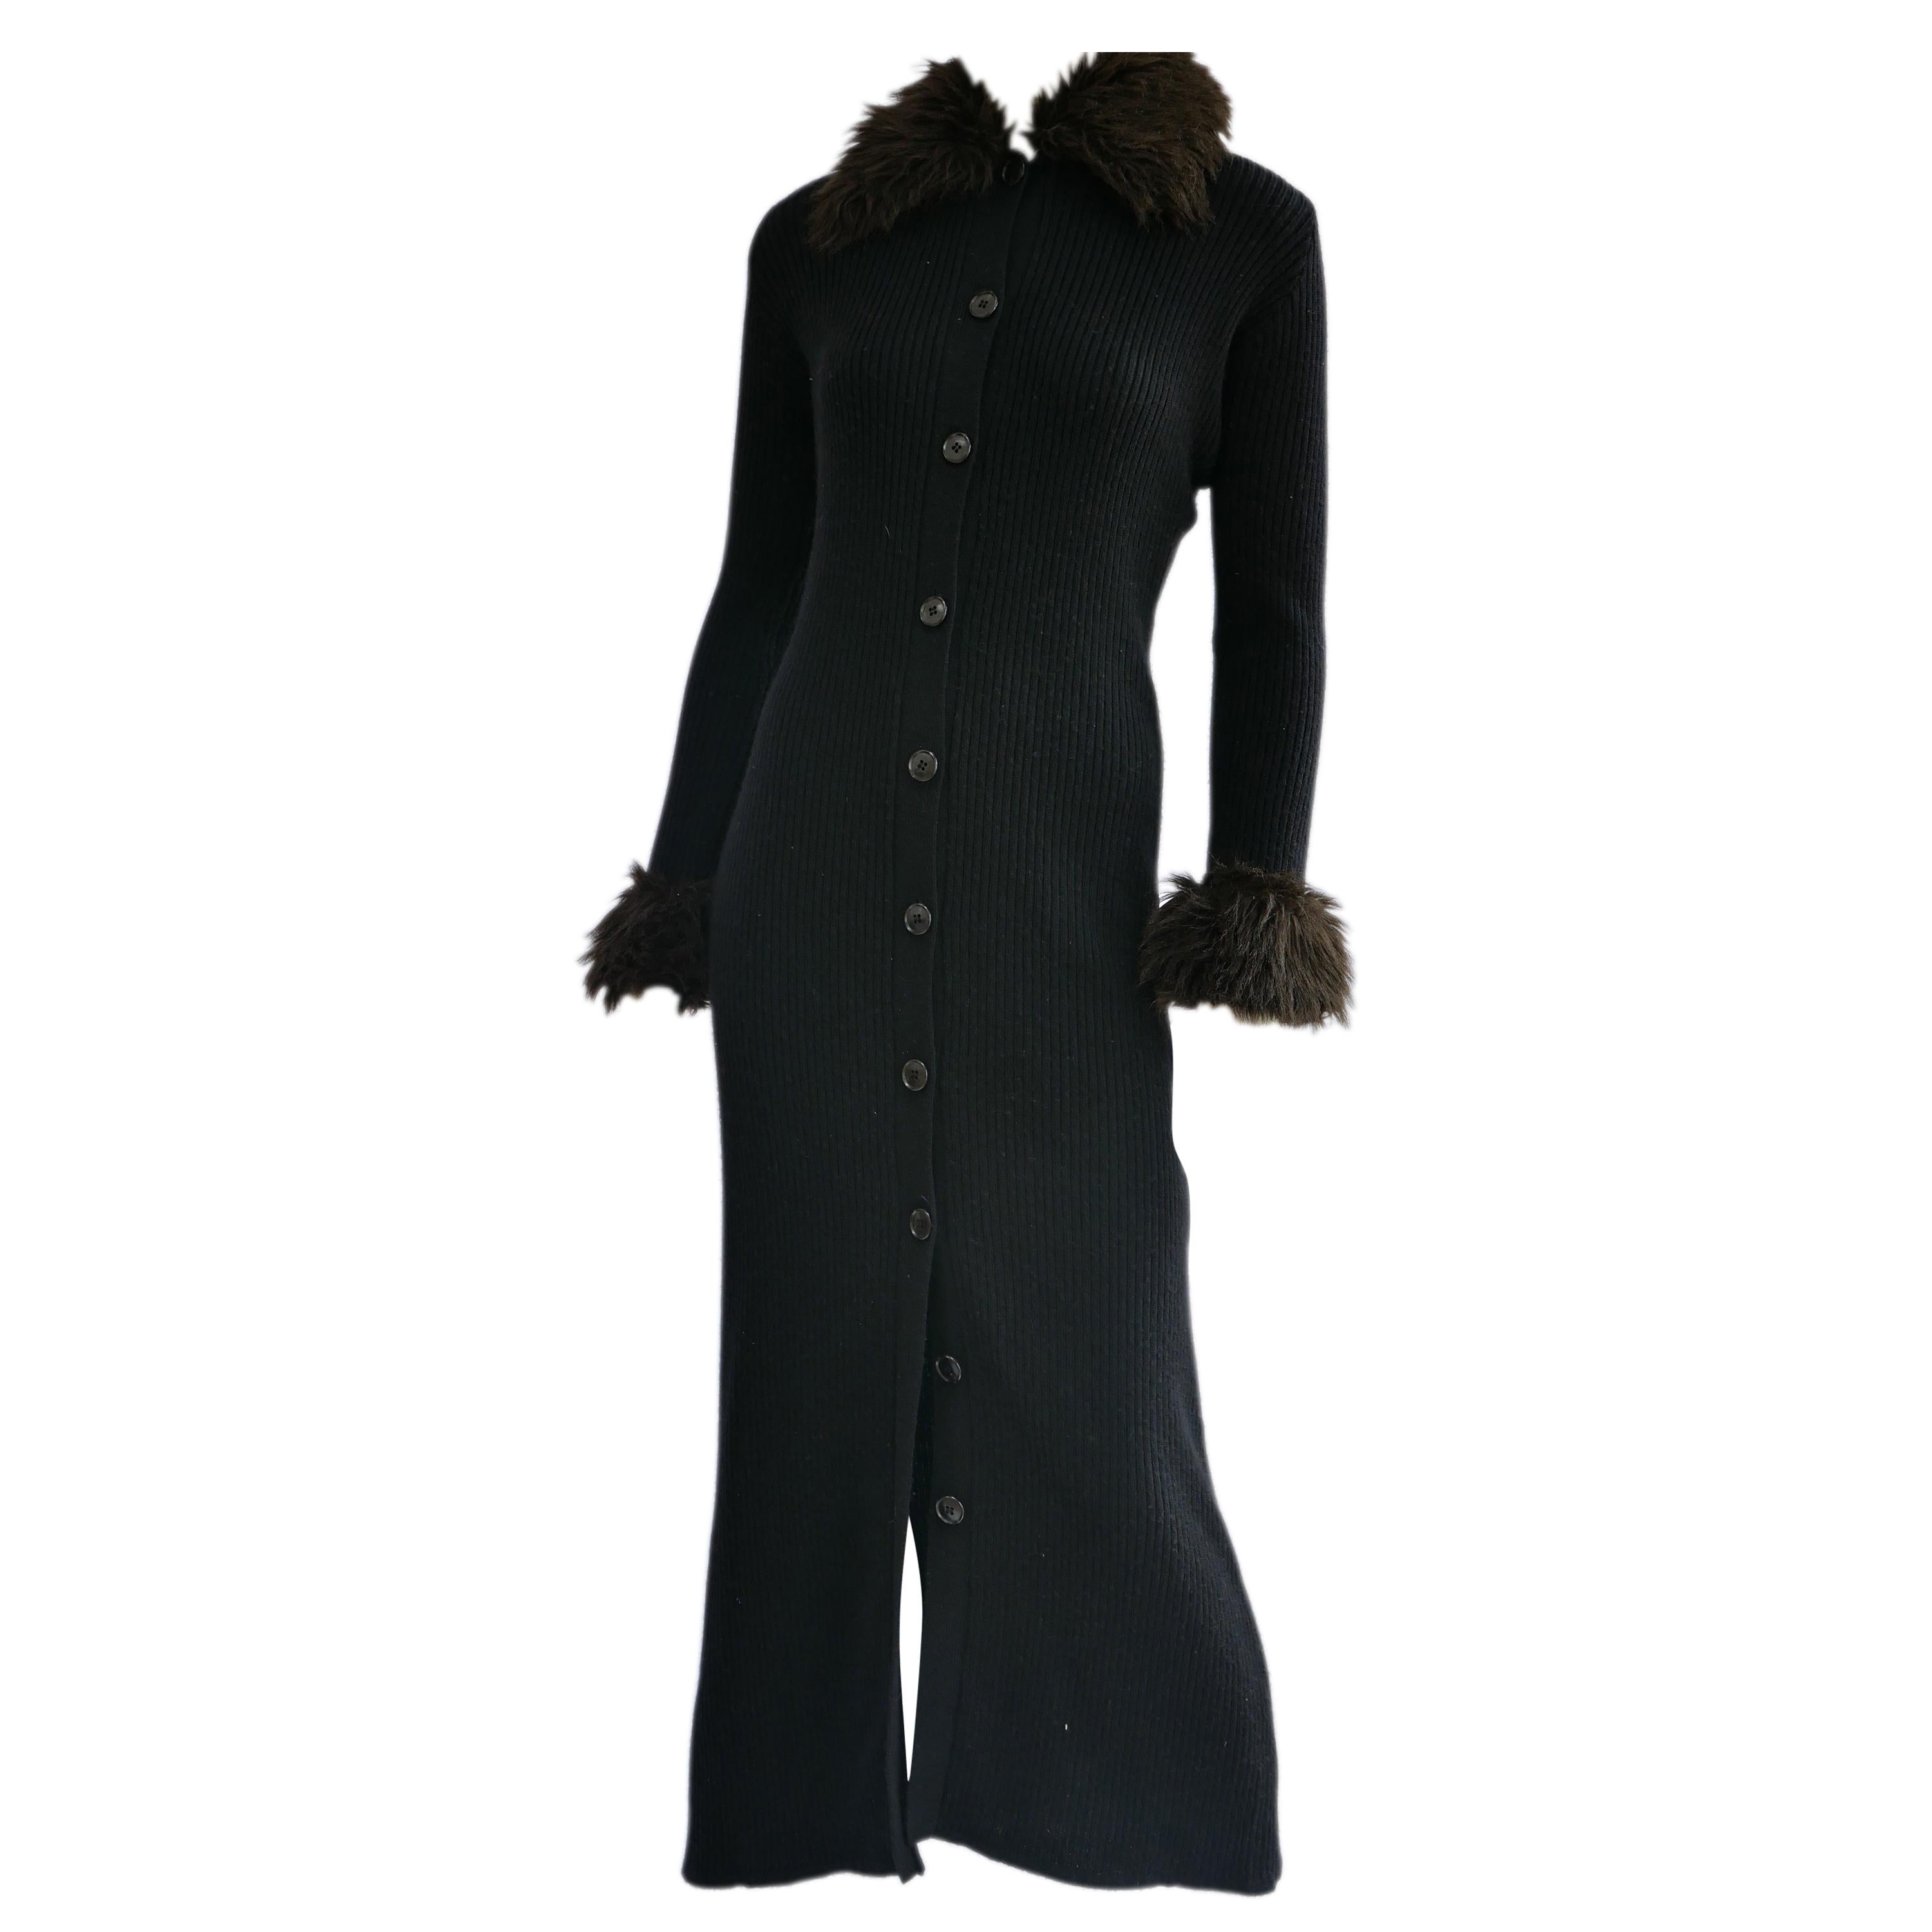 JEAN PAUL Gaultier Long Cardigan With Fur Trim Collar and Cuffs